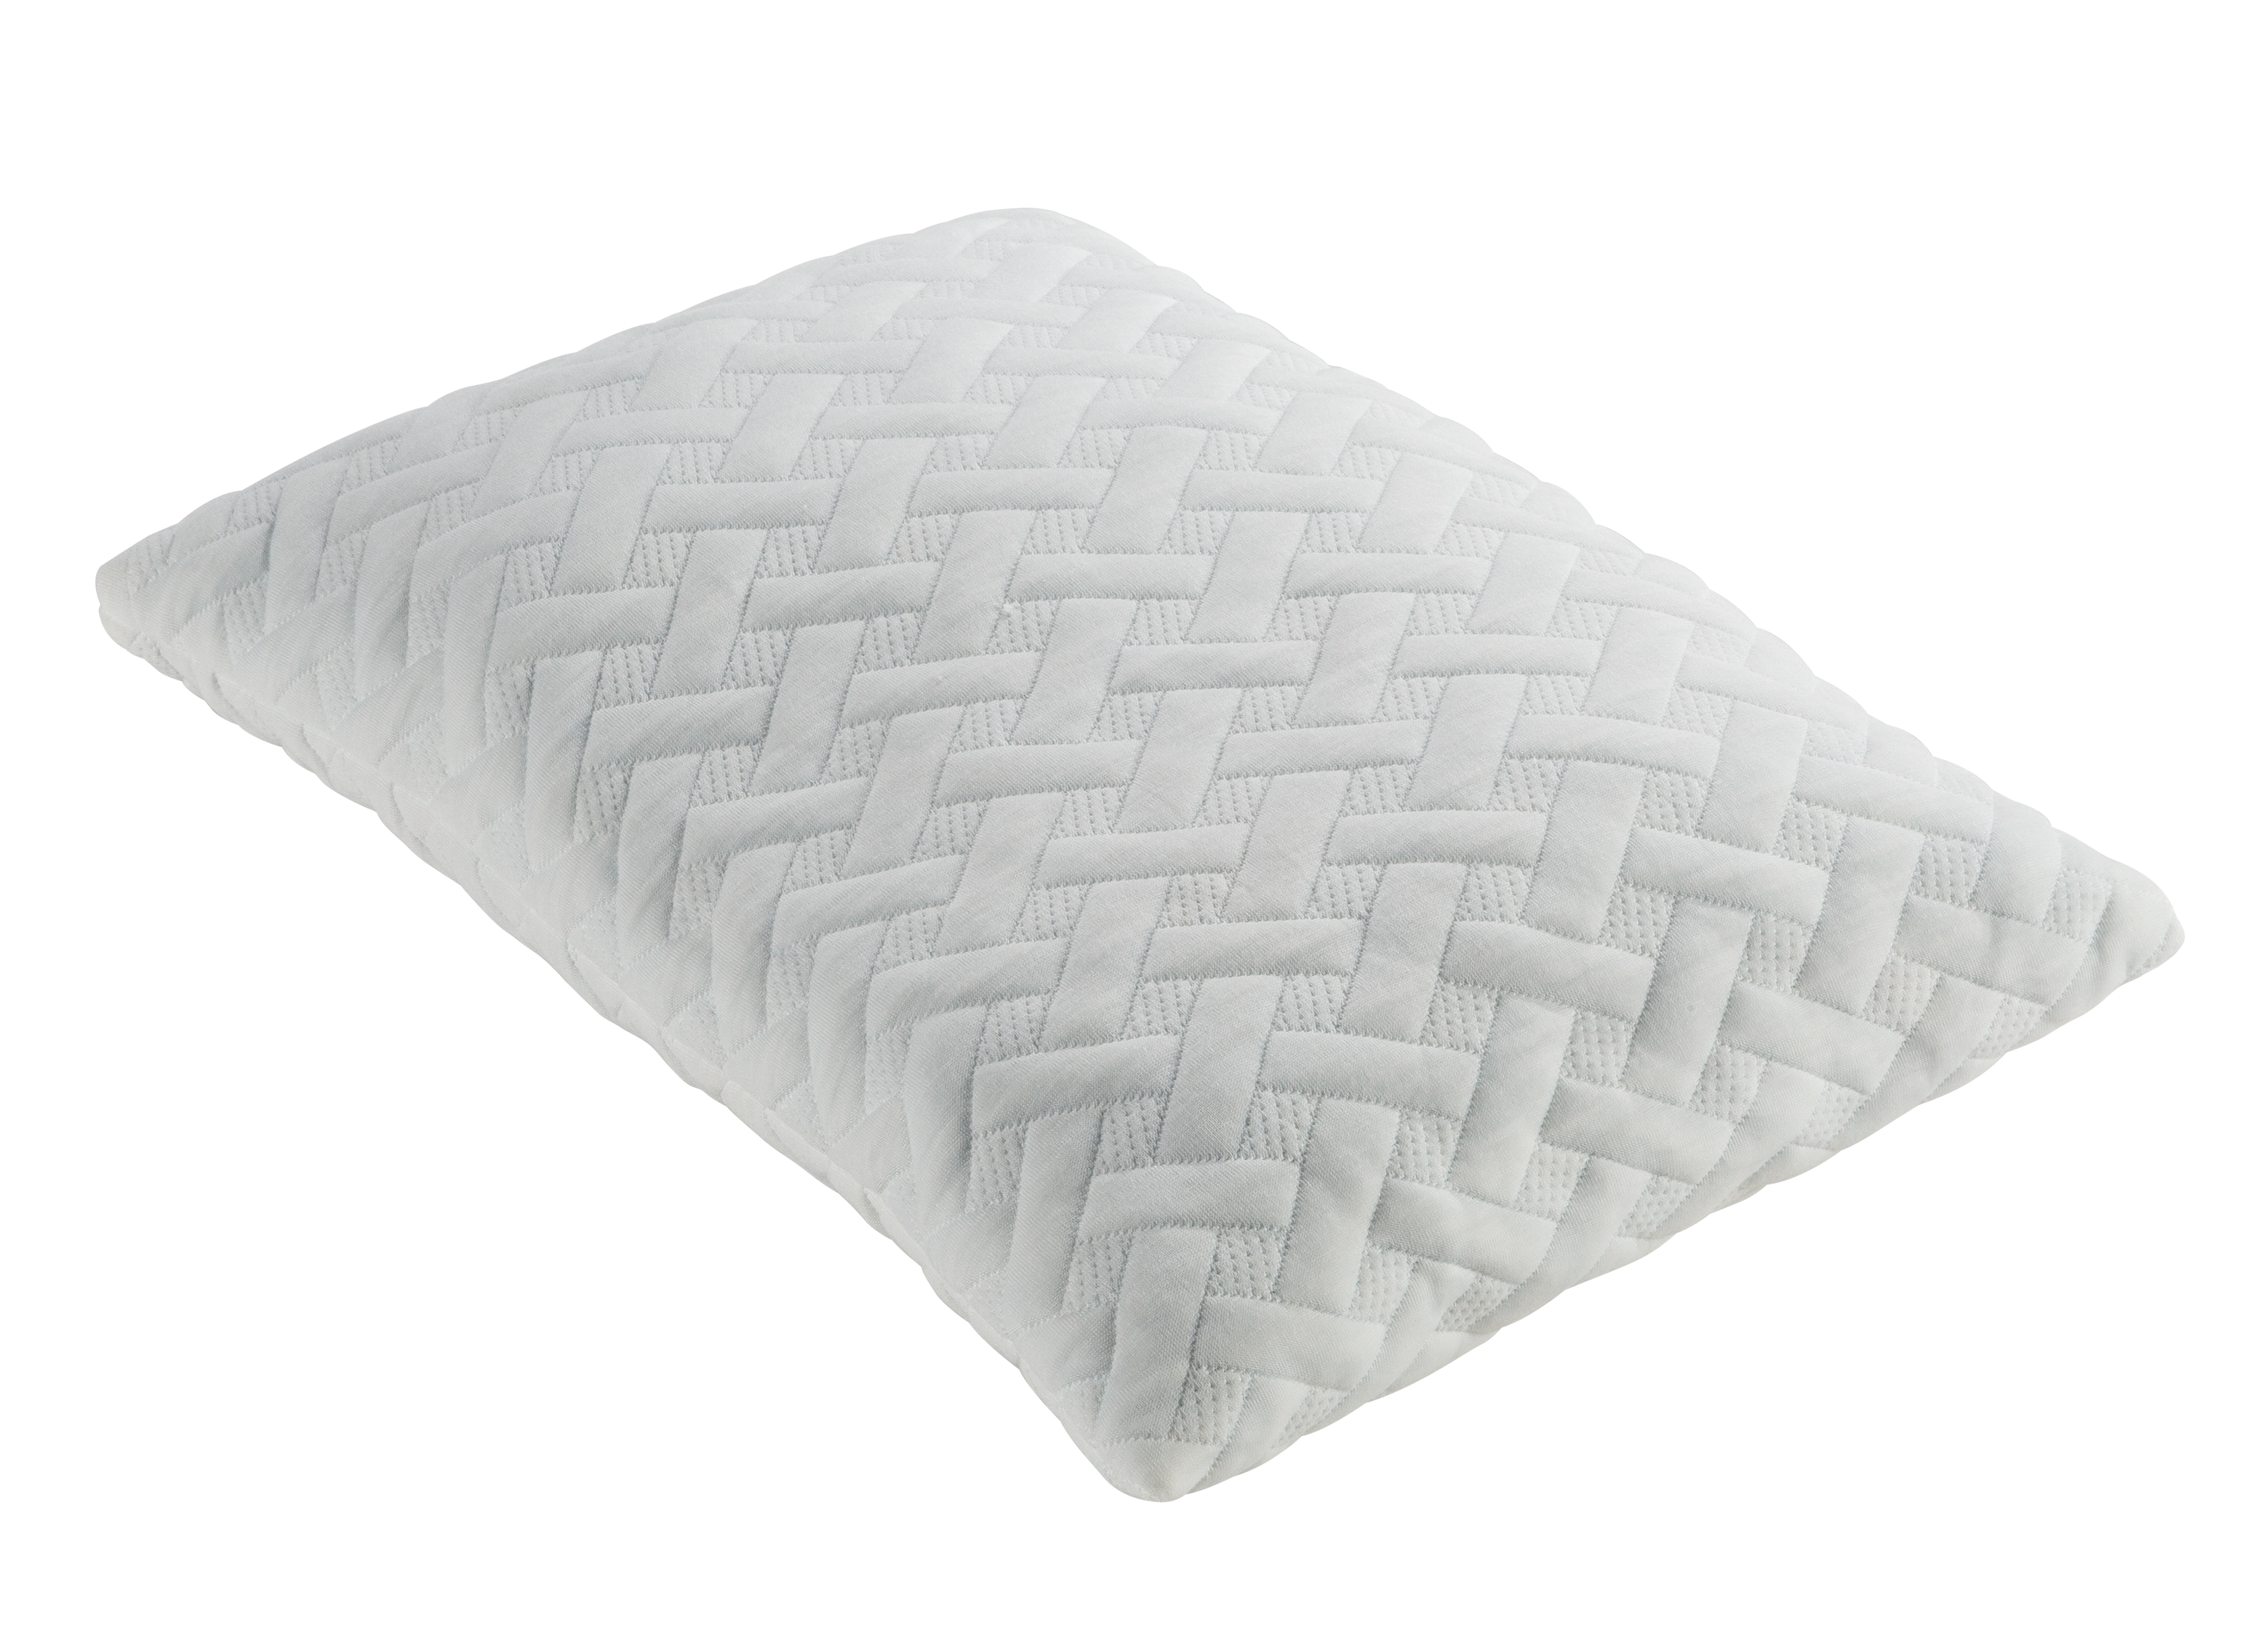 https://crdms.images.consumerreports.org/prod/products/cr/models/404451-pillows-rest-haven-memory-foam-2pk-10022743.png